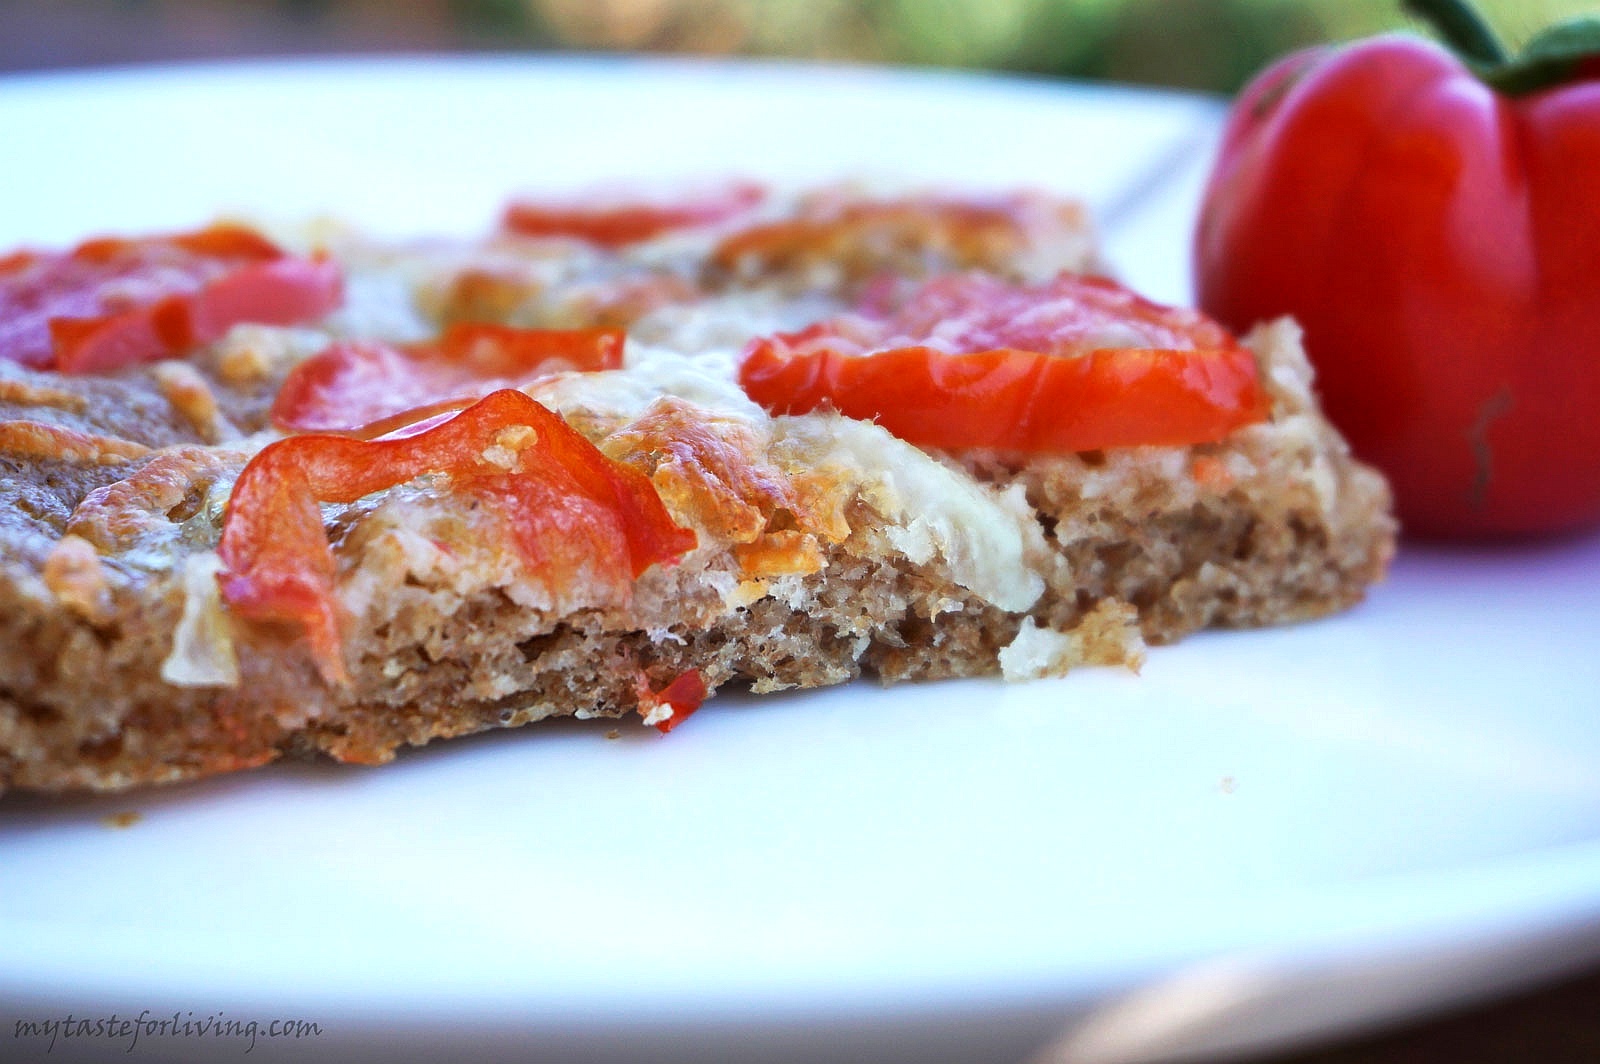 Easy and delicious whole wheat focaccia with tomatoes, mozzarella and parmesan.